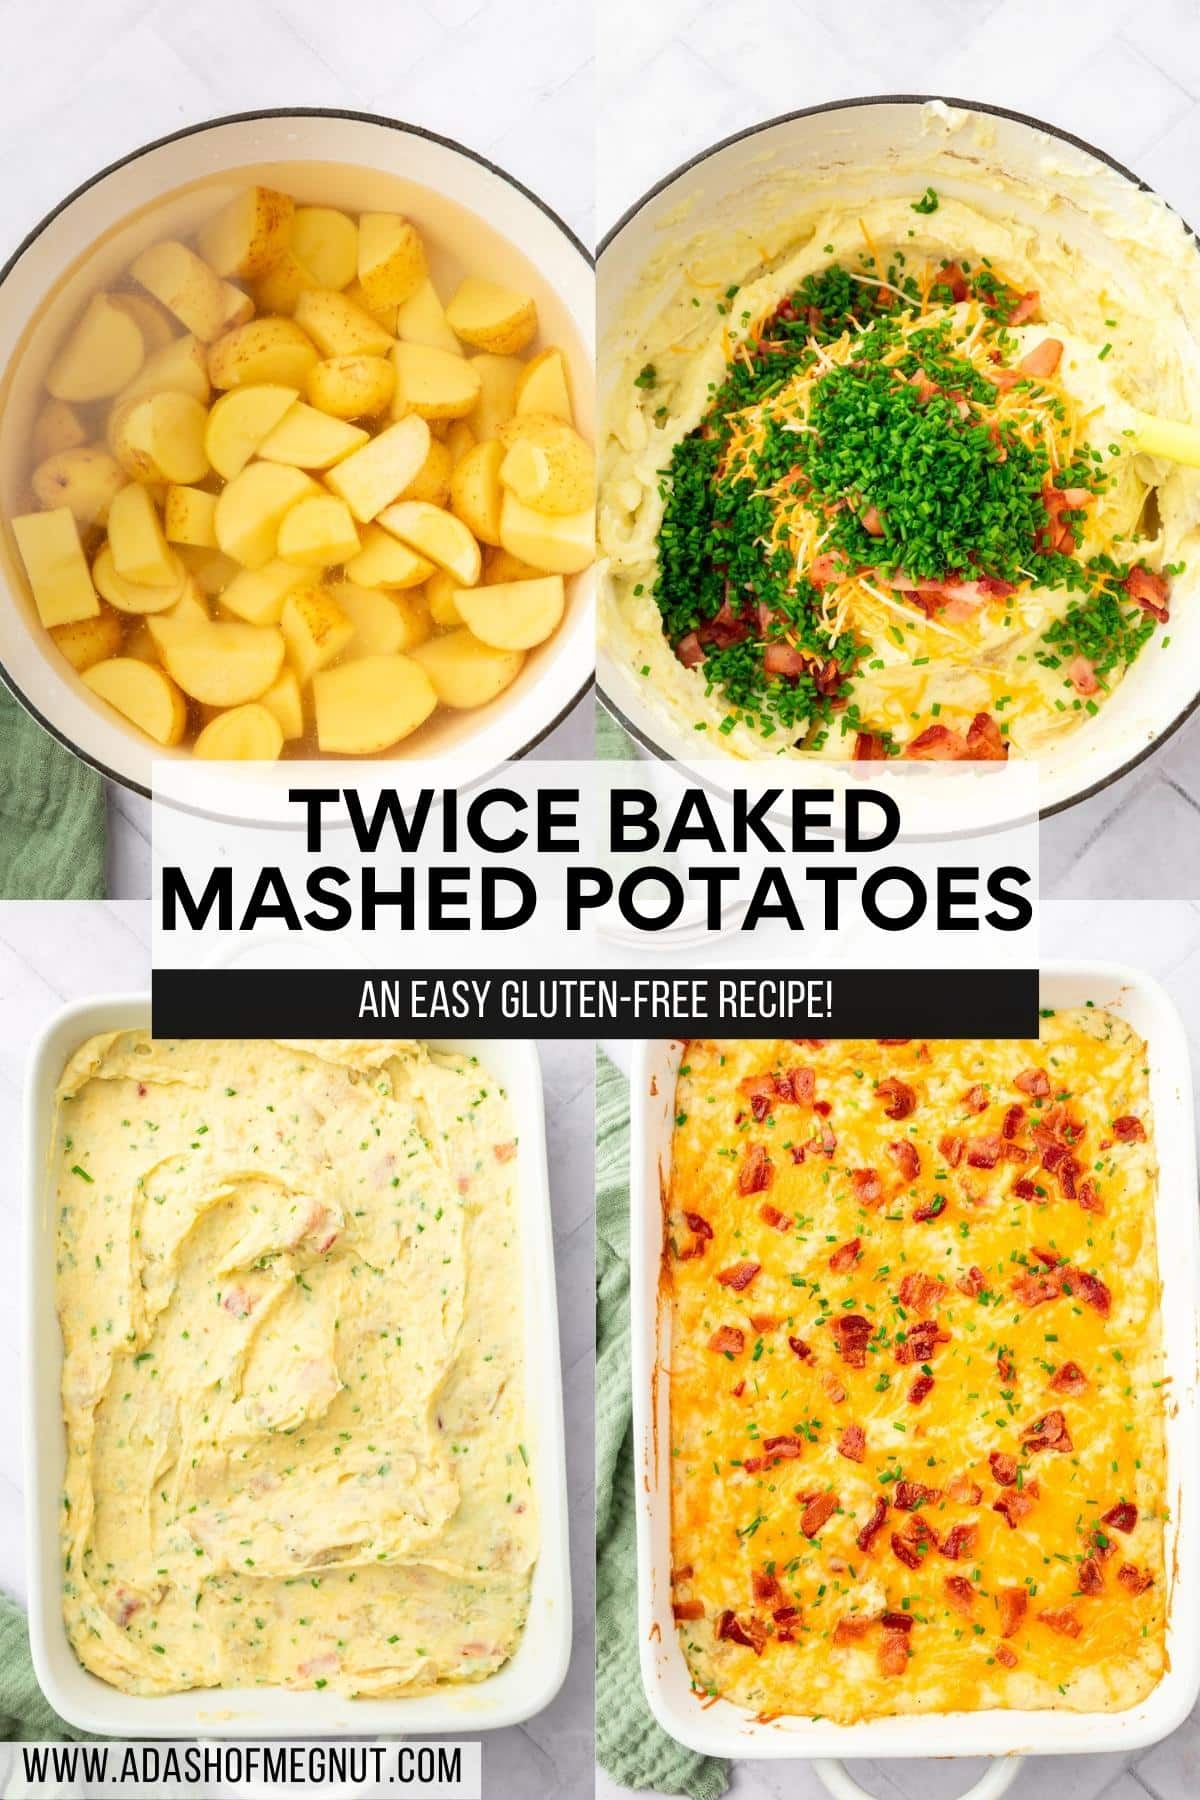 A four photo collage showing the process of making twice baked mashed potatoes: Photo 1: Diced potatoes and water in a white dutch oven. Photo 2: Mashed potatoes topped with chives, bacon and cheddar cheese before mixing it. Photo 3: A 9x13-inch casserole dish with mashed potatoes mixed with chives and bacon. Photo 4: A 9x13-inch baking dish with loaded mashed potatoes topped with melted cheddar cheese, bacon bits, and chopped chives.